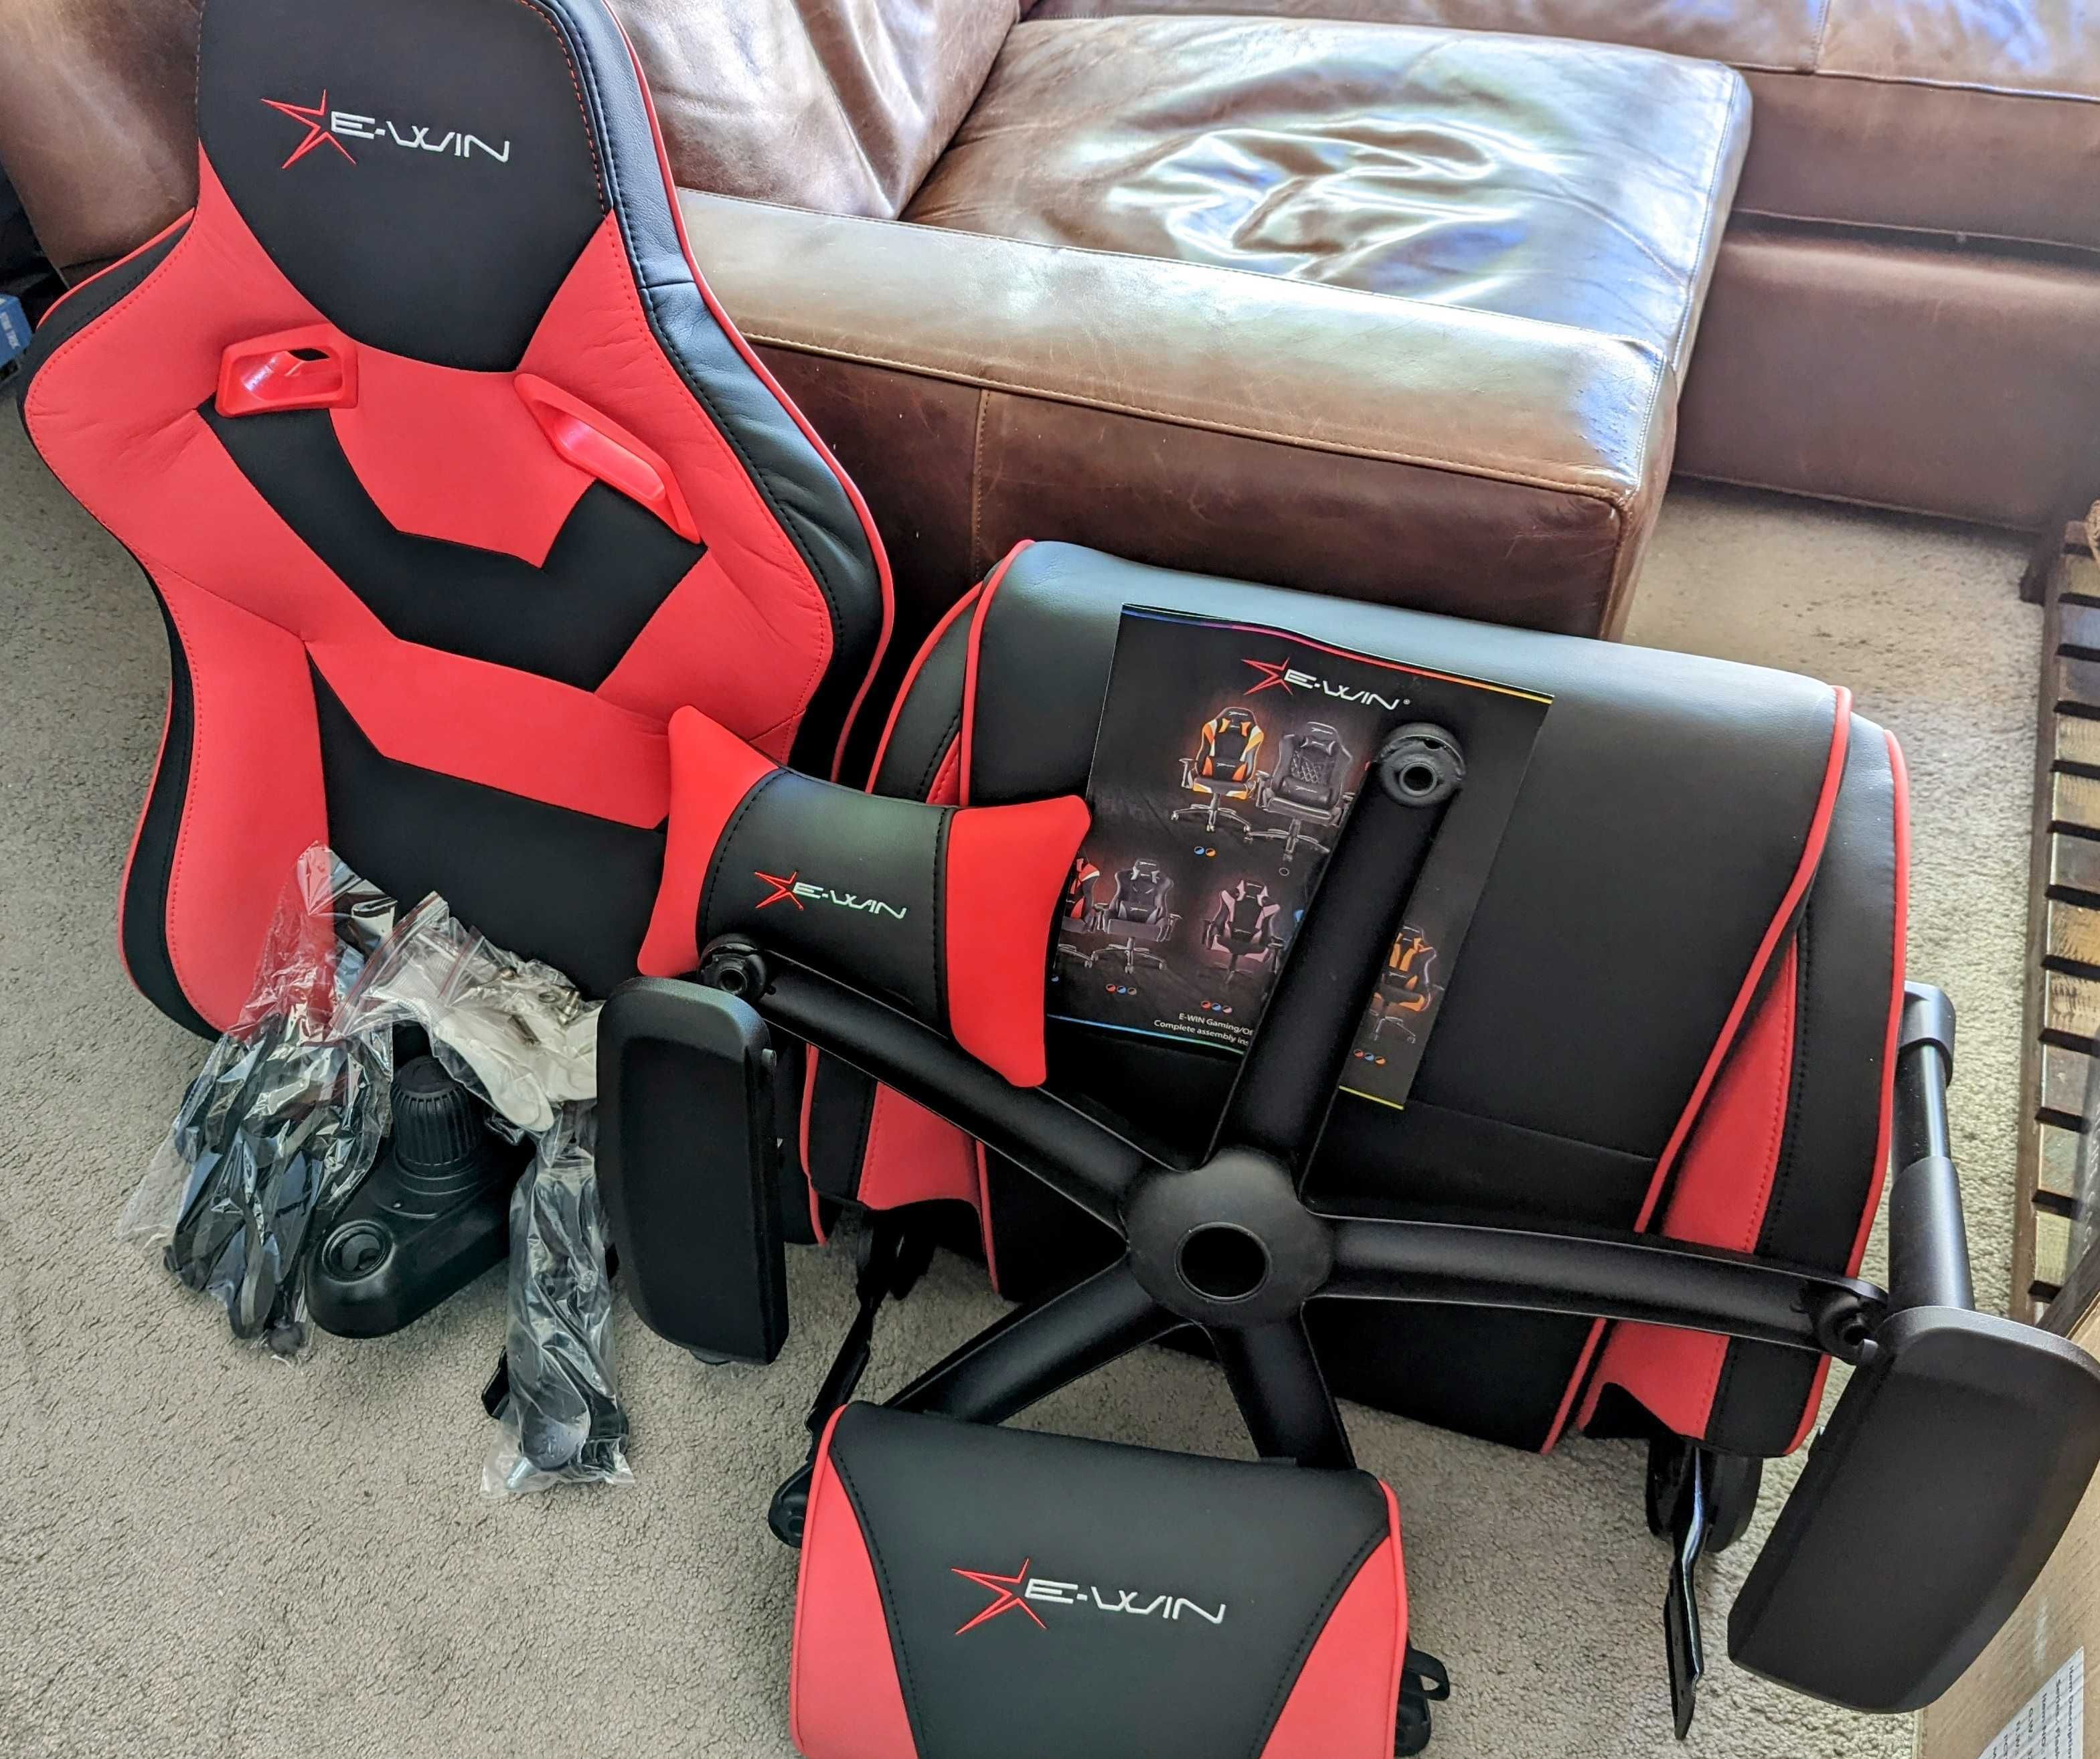 The contents of the box for the E-Win Flash XL gaming chair